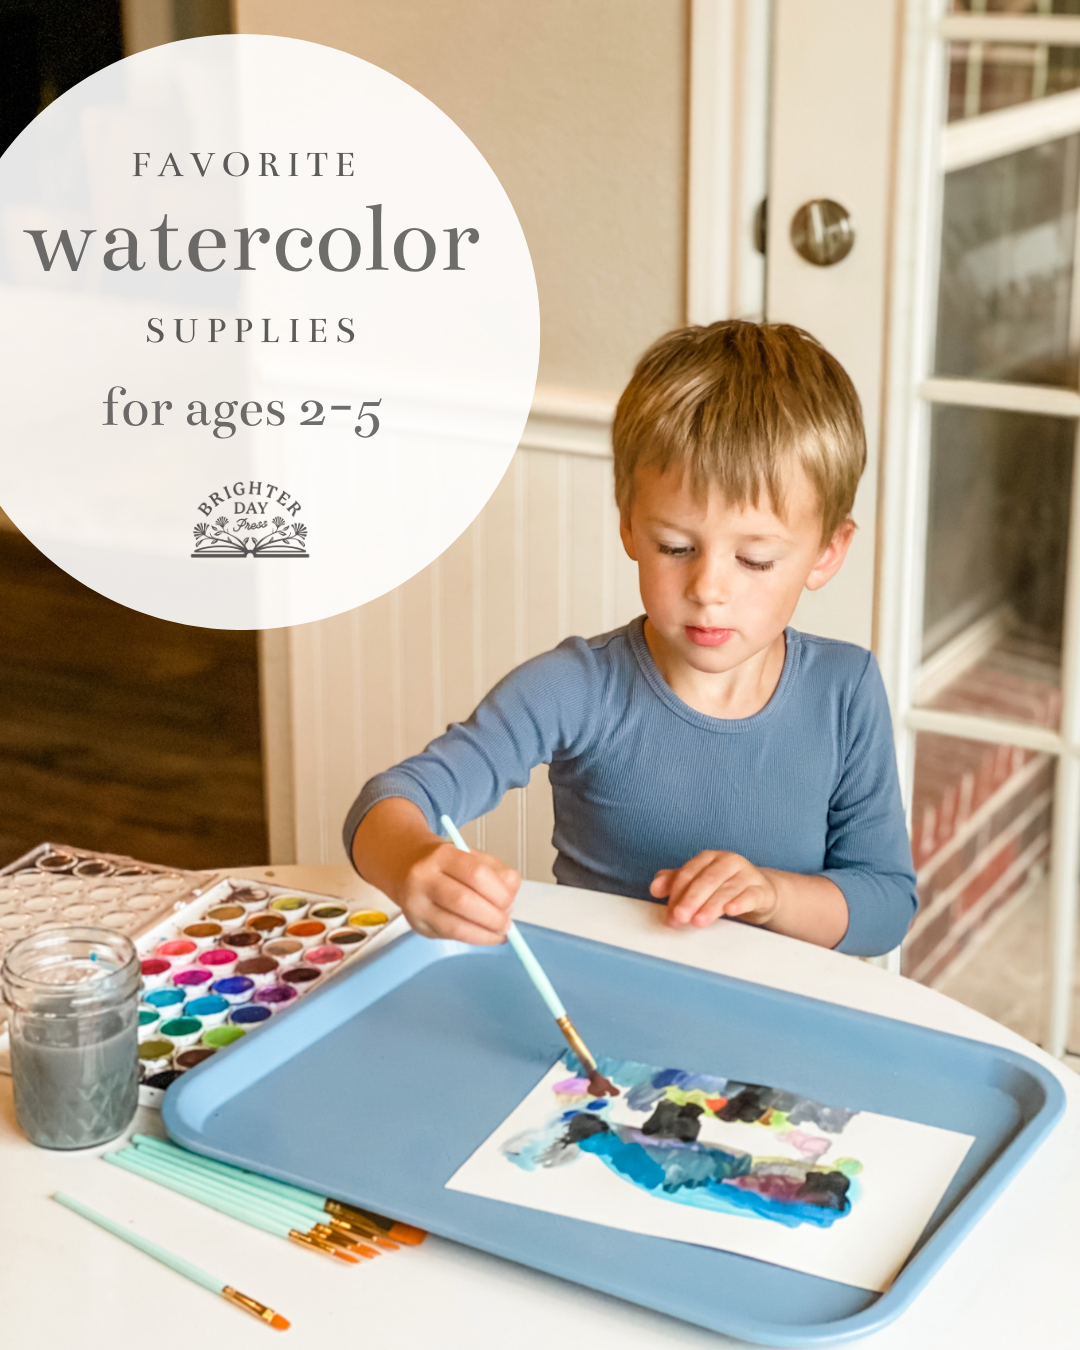 Watercolor Supplies for Ages 2-5